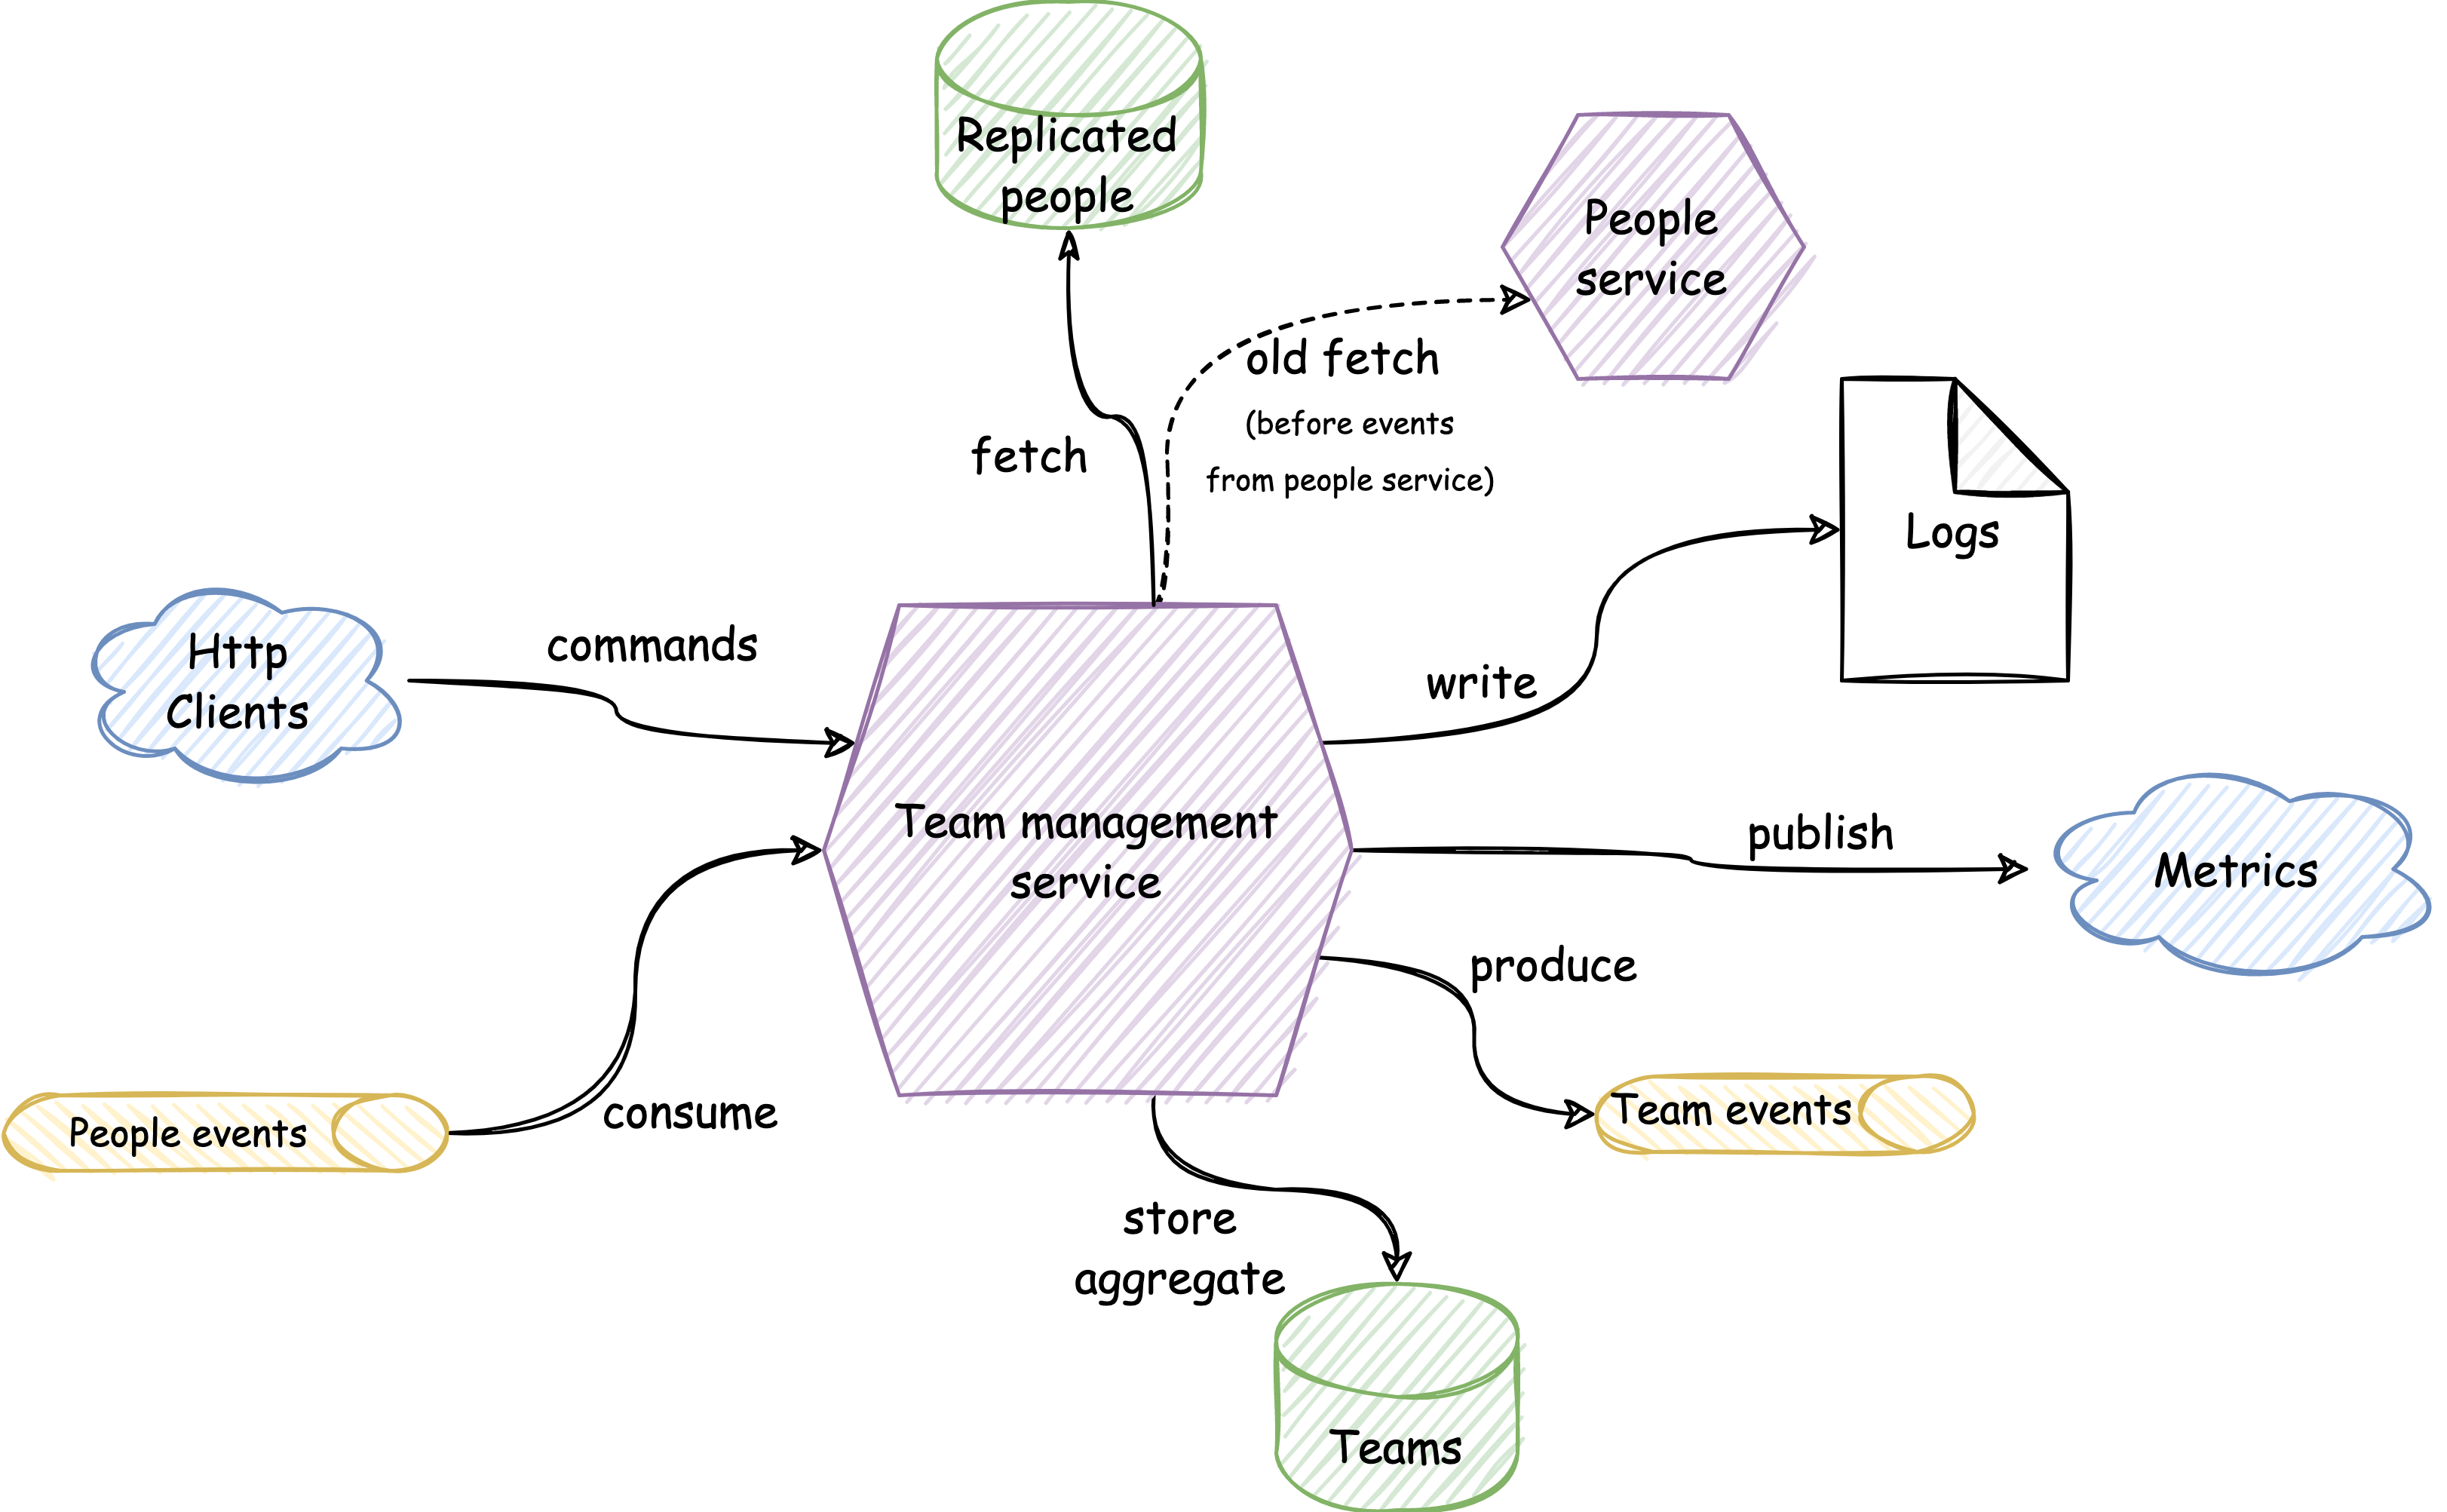 team-mgmt-service.png